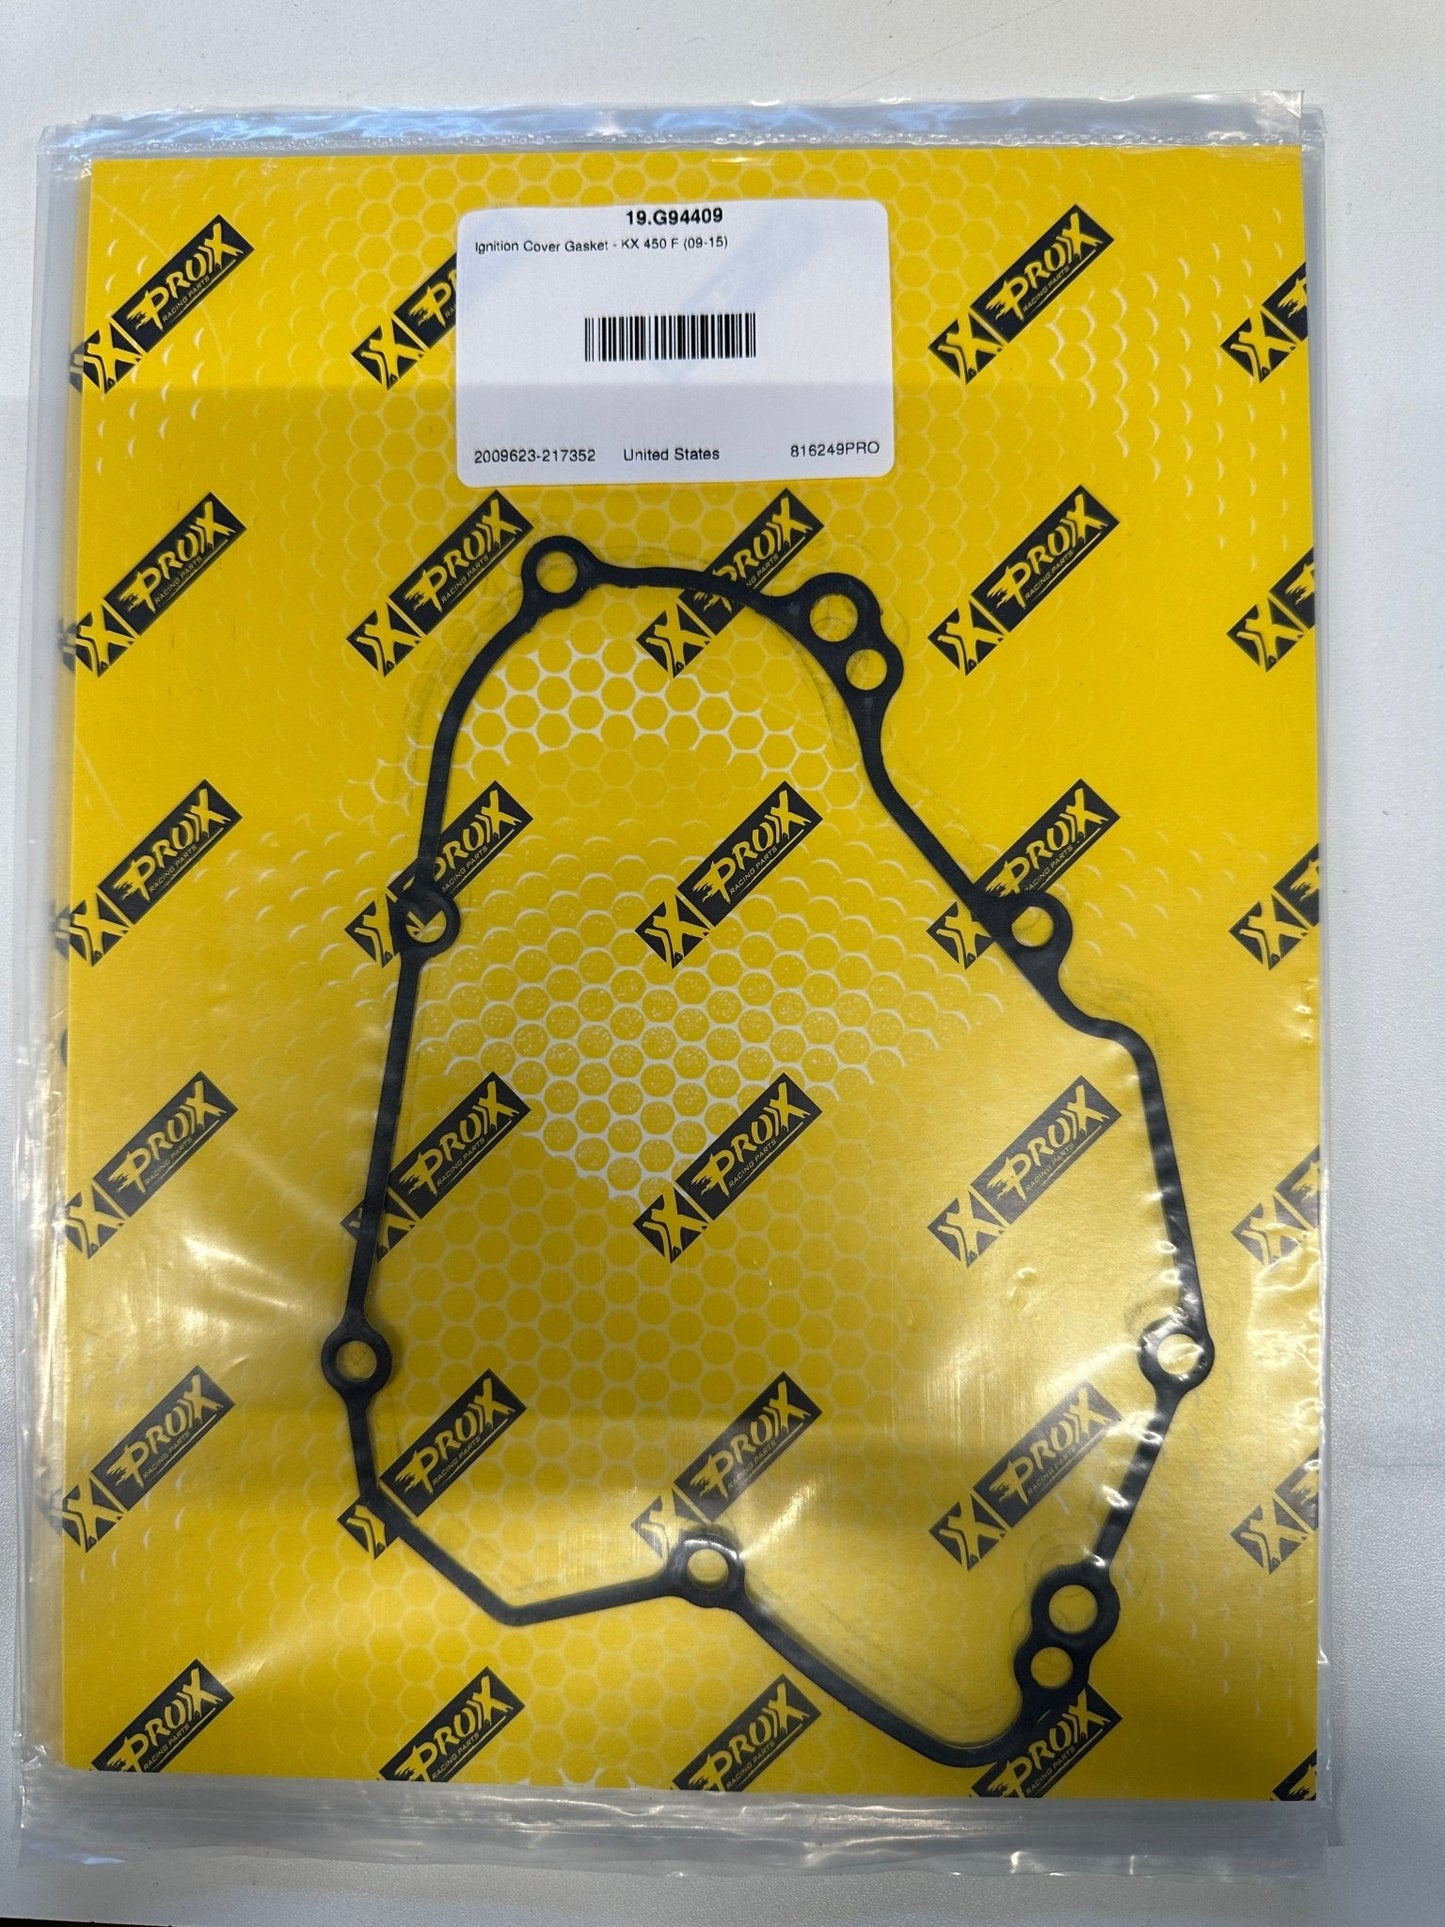 ProX Ignition Cover Gasket KX450F ’09-15 - ProX Racing Parts